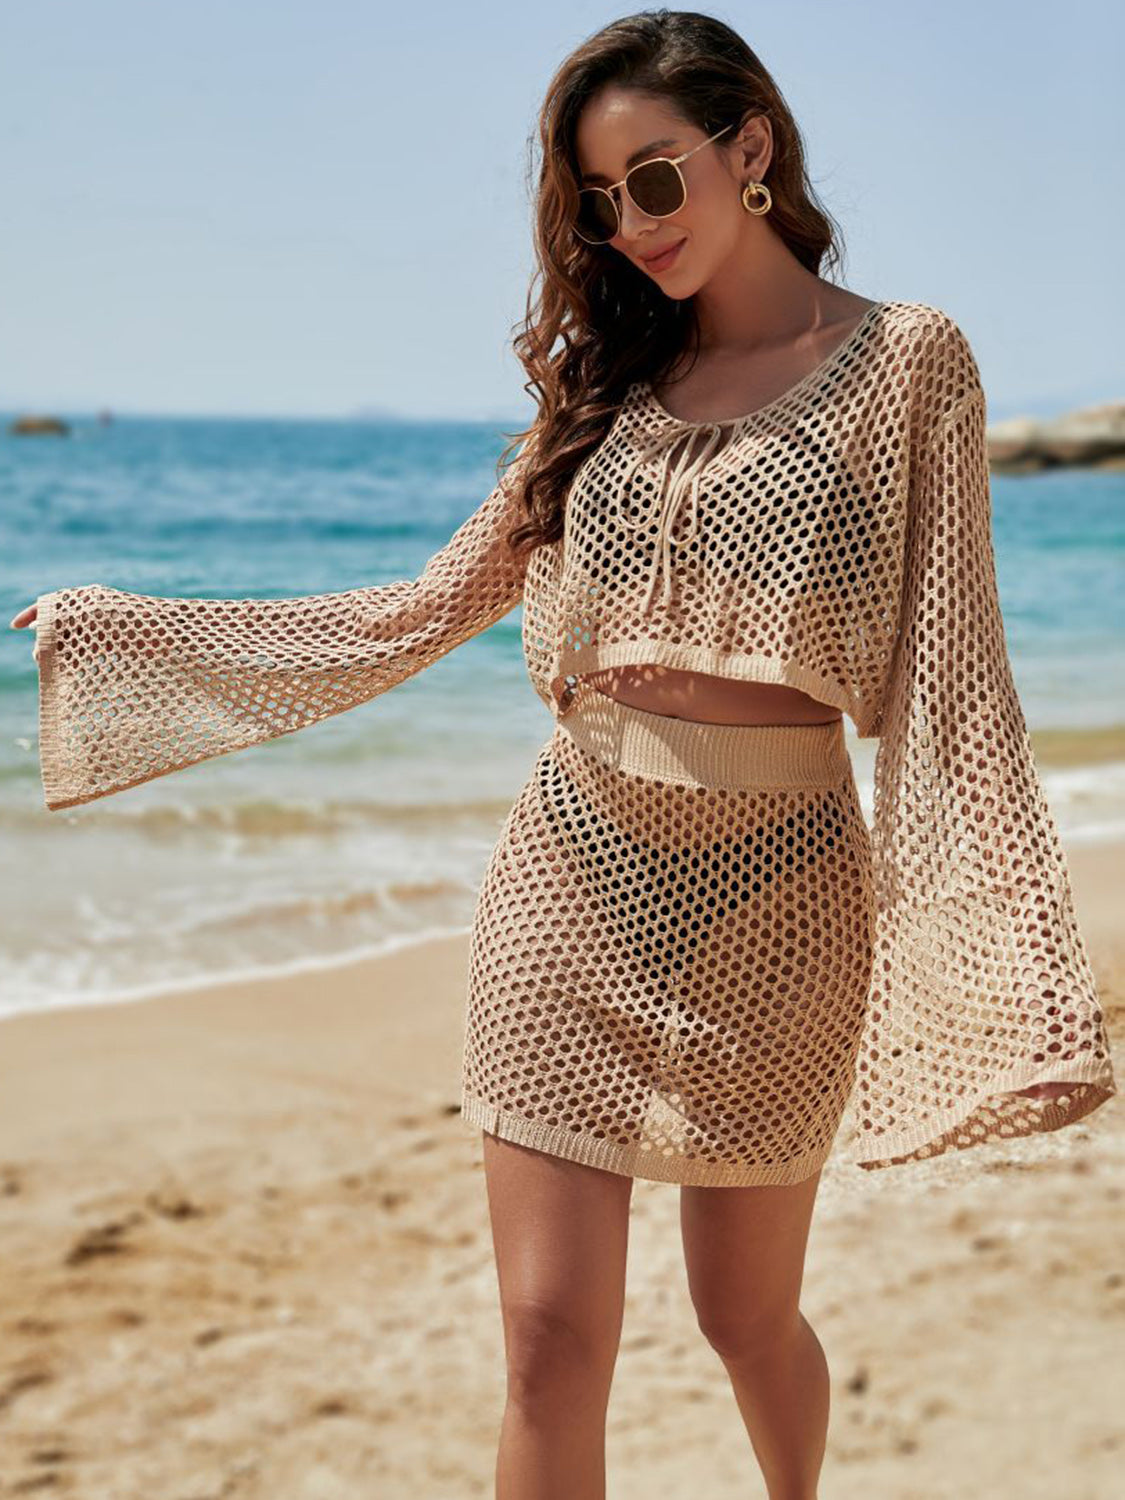 Sunset Vacation  Openwork Tie Neck Top and Skirt Swimsuit Cover-Up Set  Sunset and Swim   